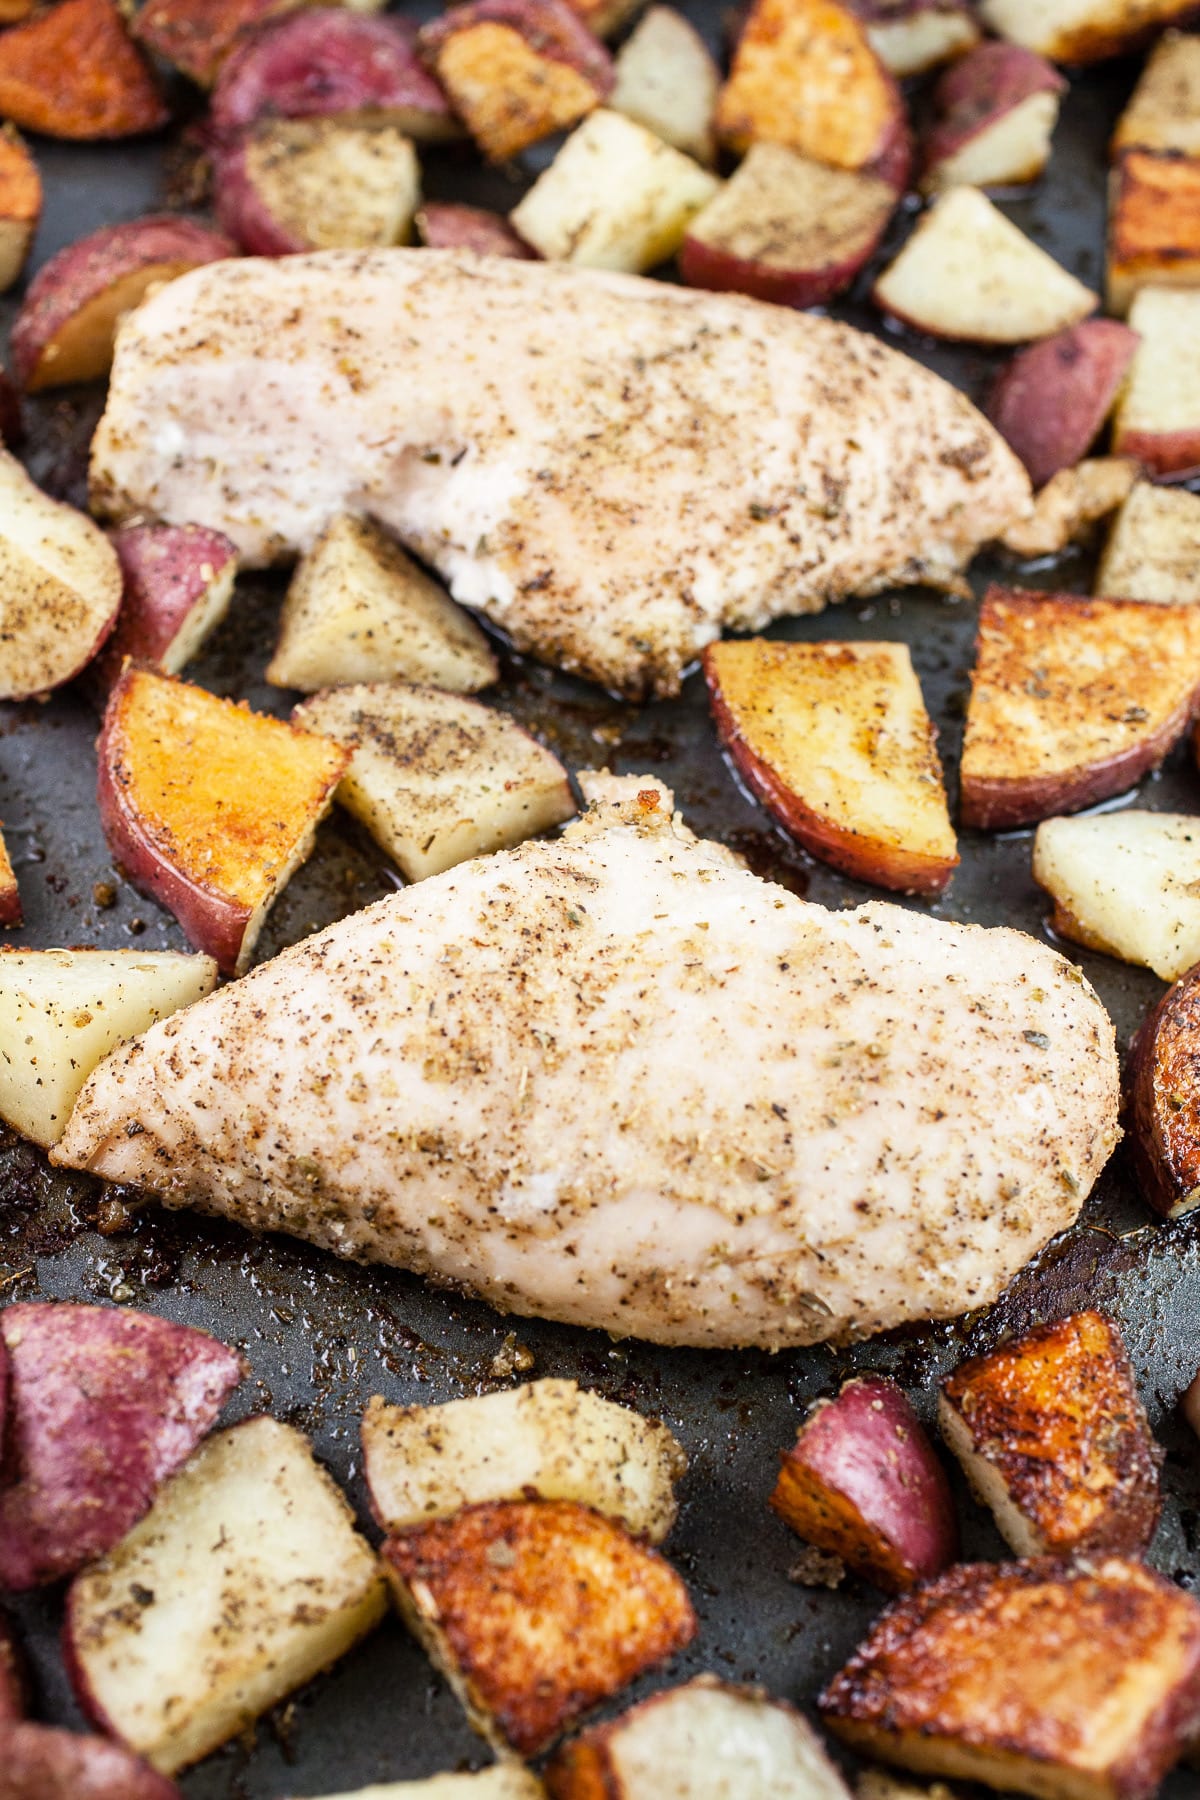 Roasted chicken and potatoes on baking sheet.